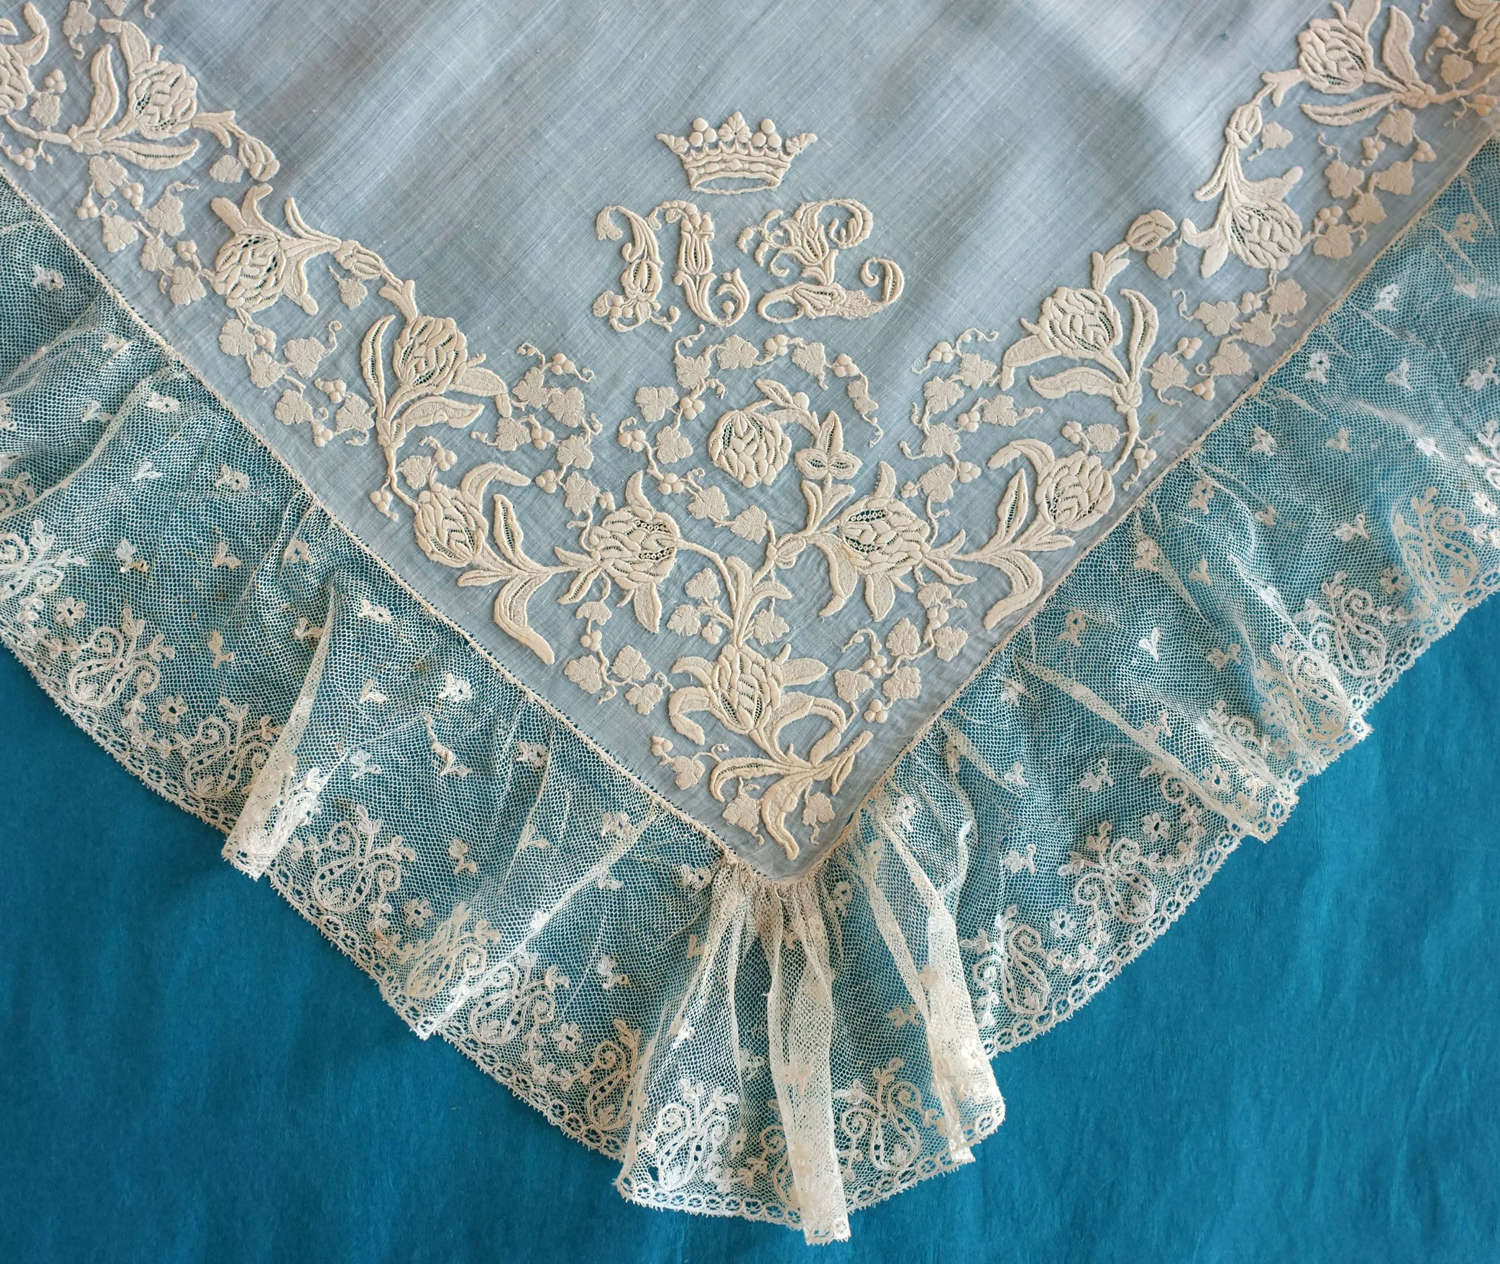 Antique late 19th Century Embroidered Handkerchief with Coronet